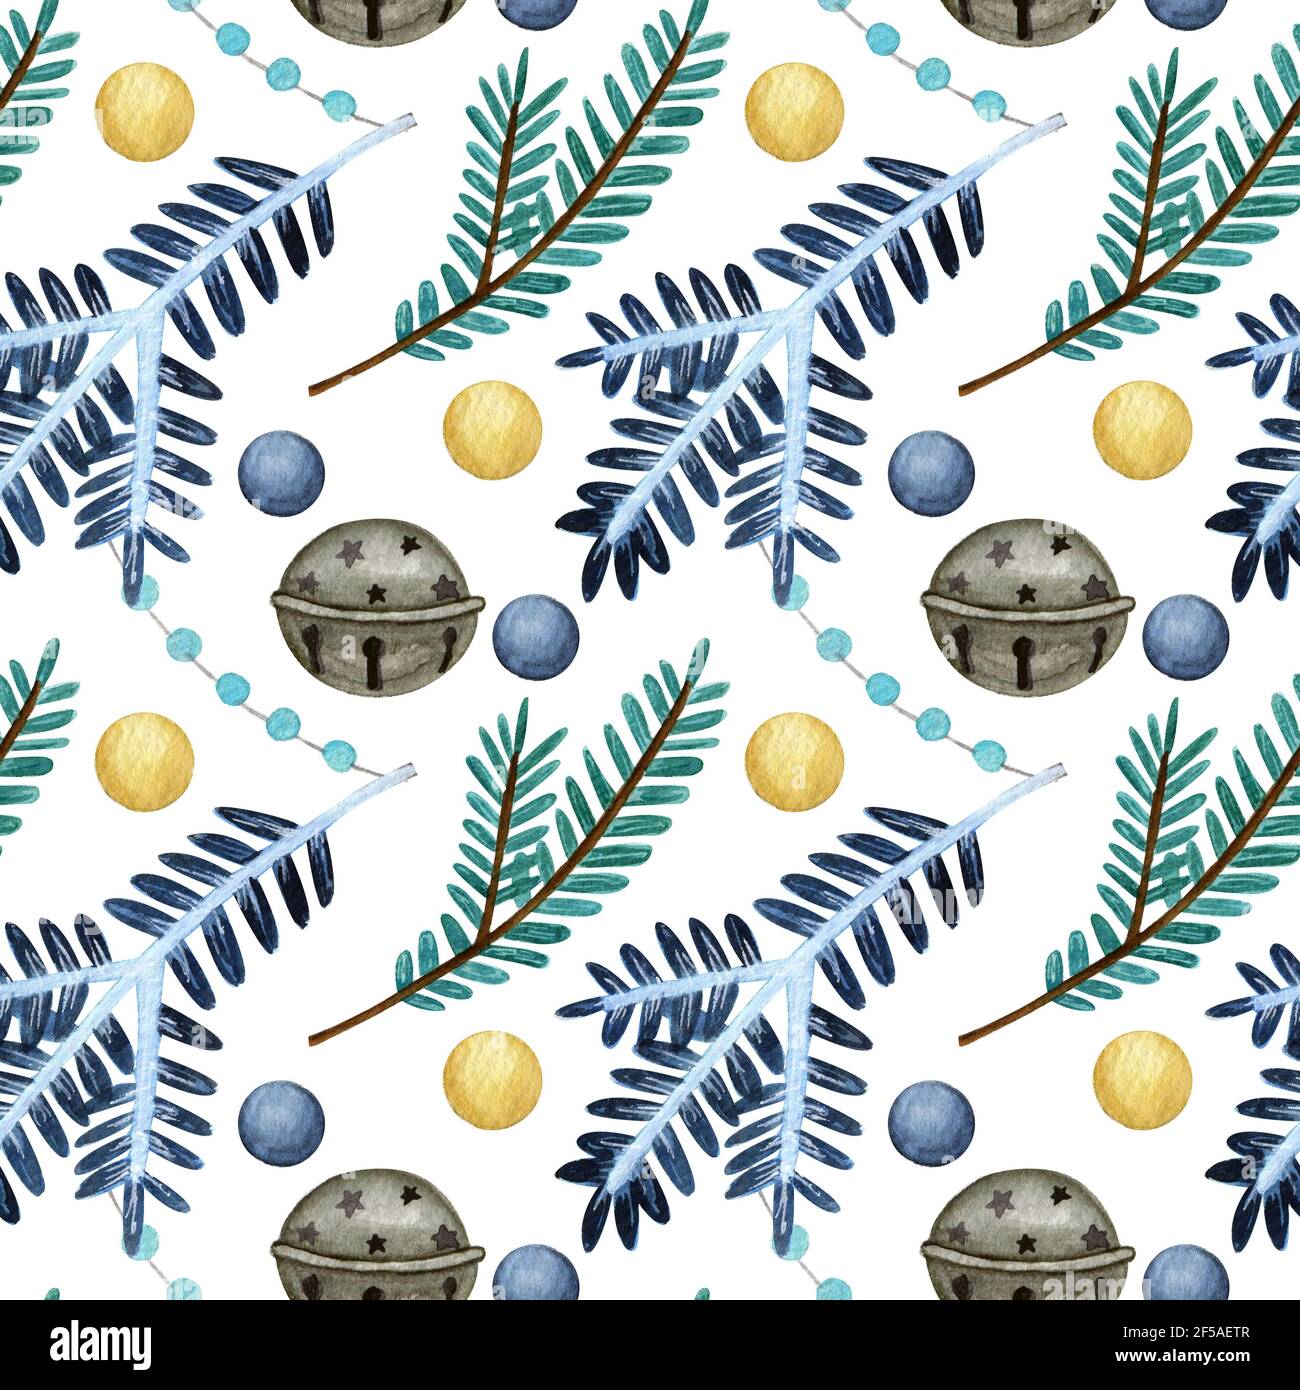 Hand drawn watercolor seamless pattern. winter themed background.  Stock Photo